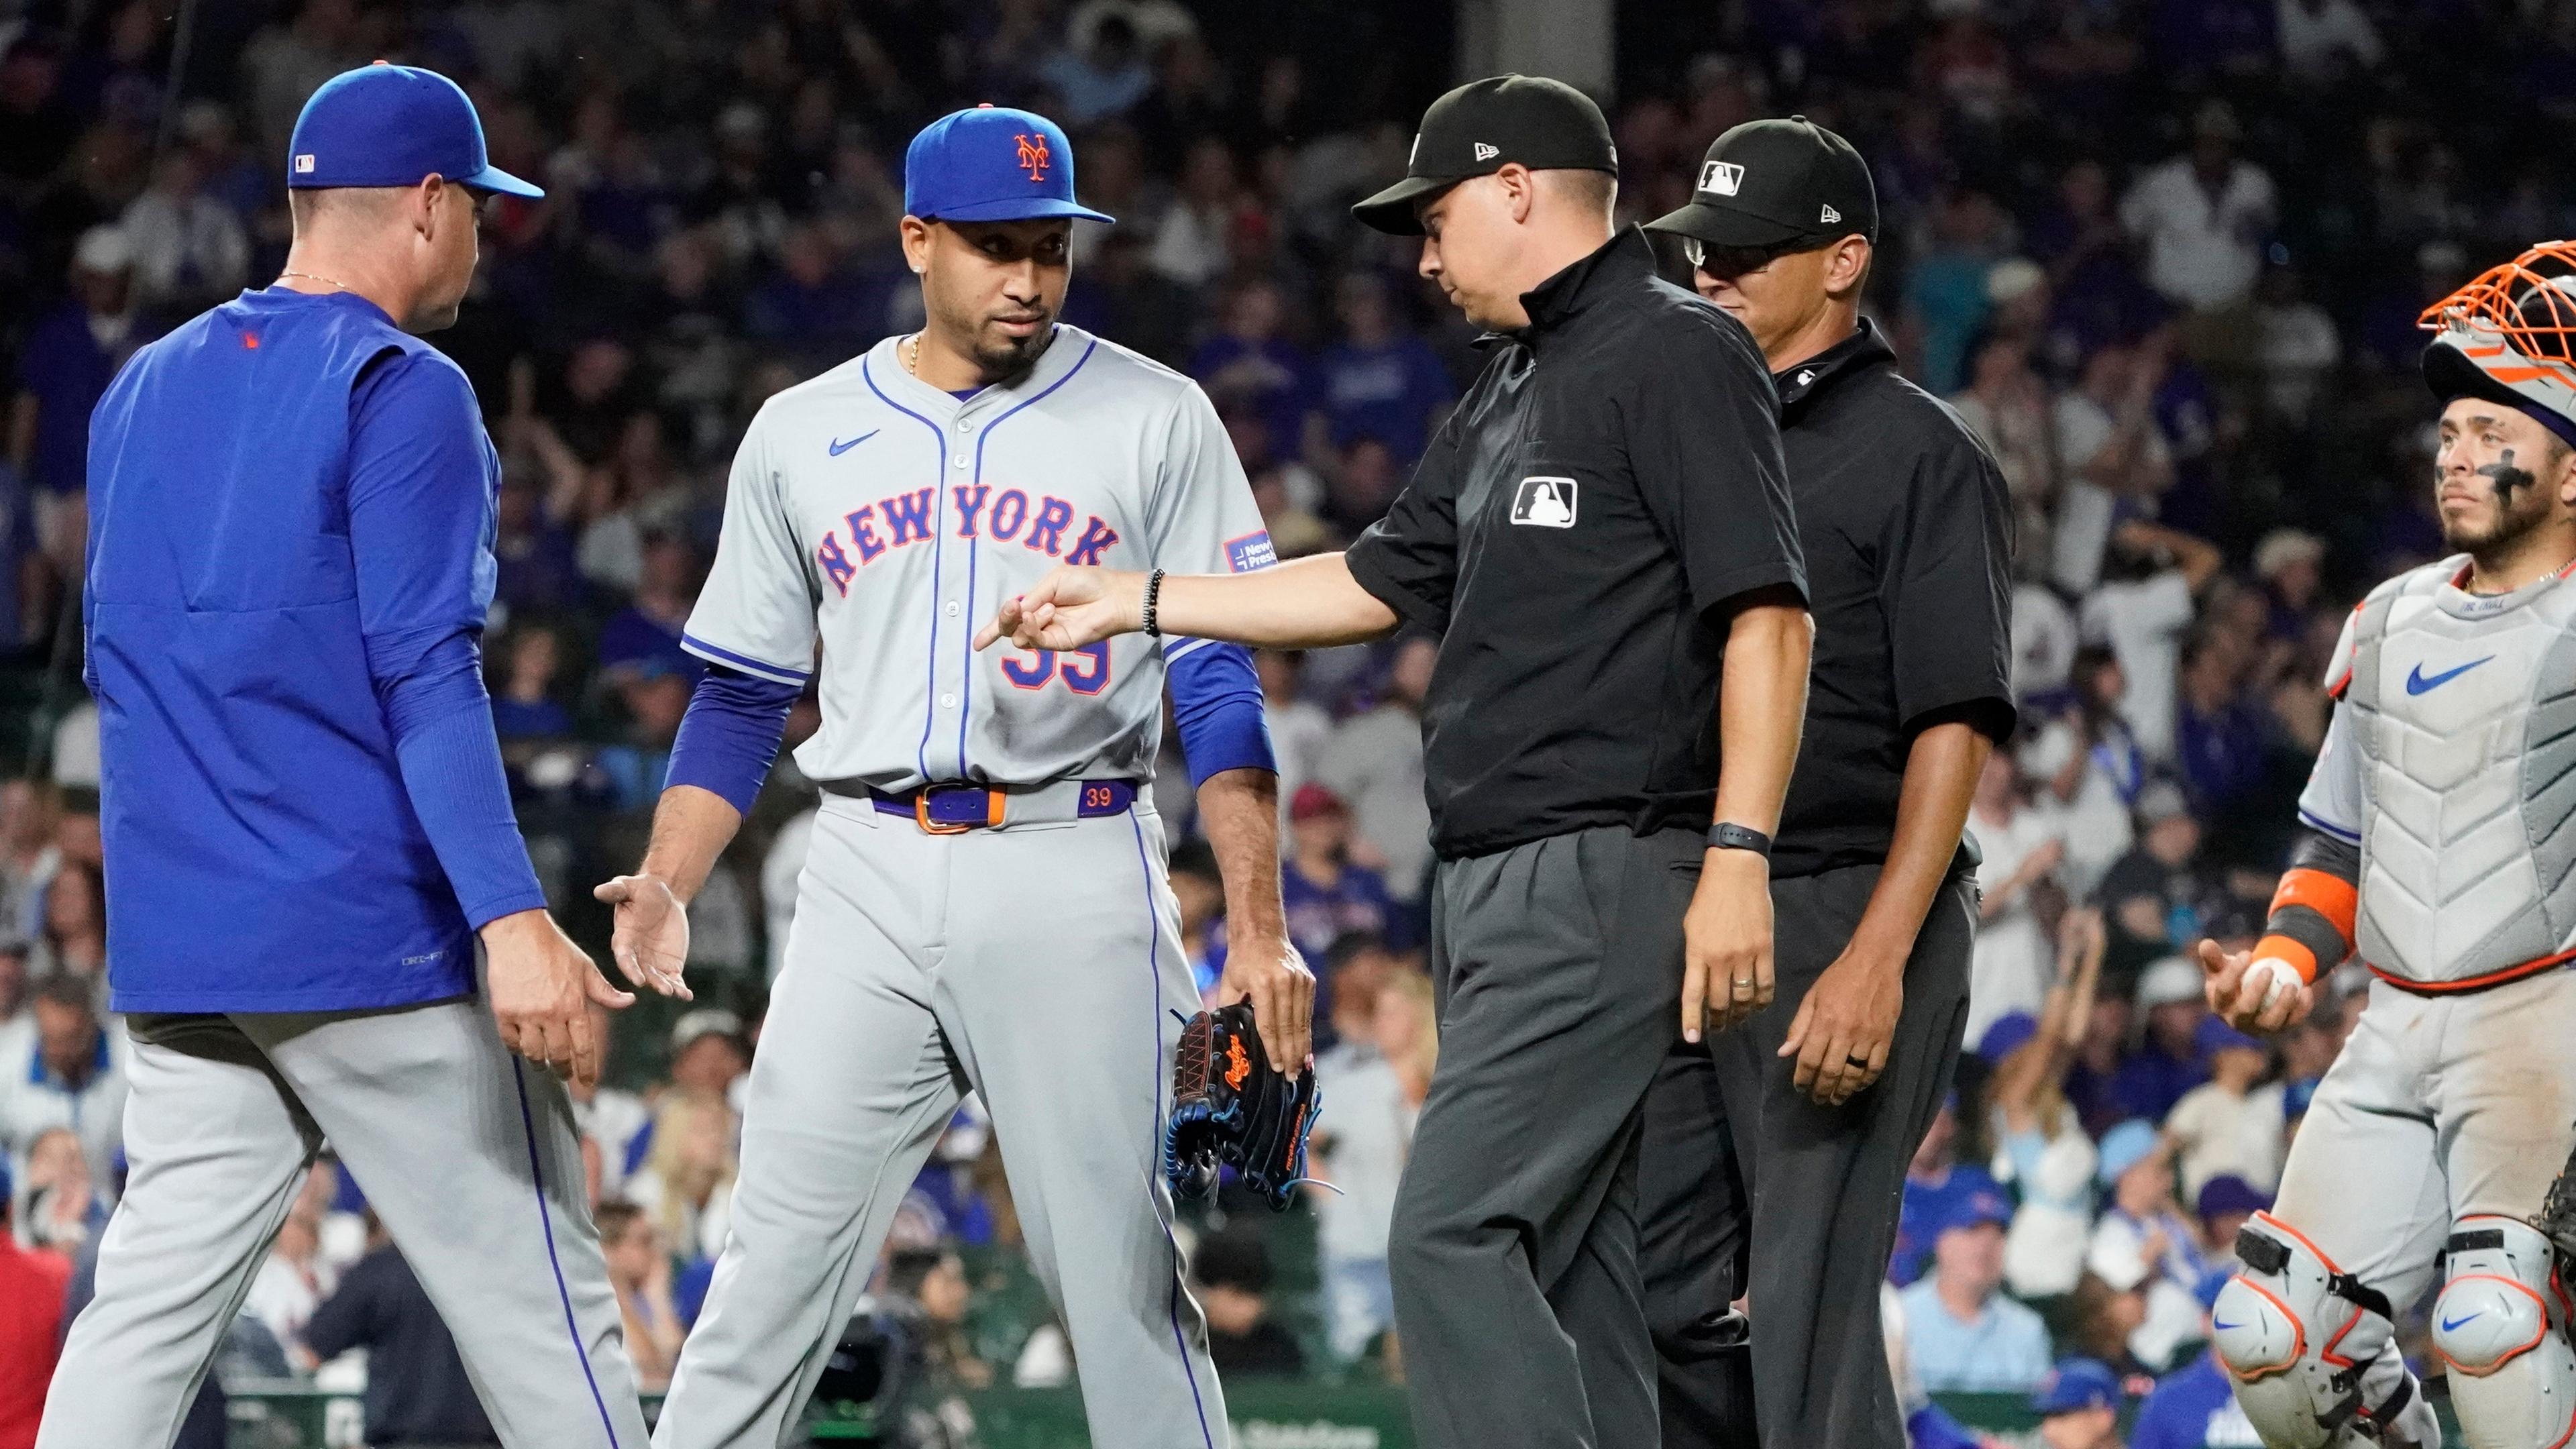 Mets' Edwin Diaz 'really surprised' by ejection for sticky stuff against Cubs